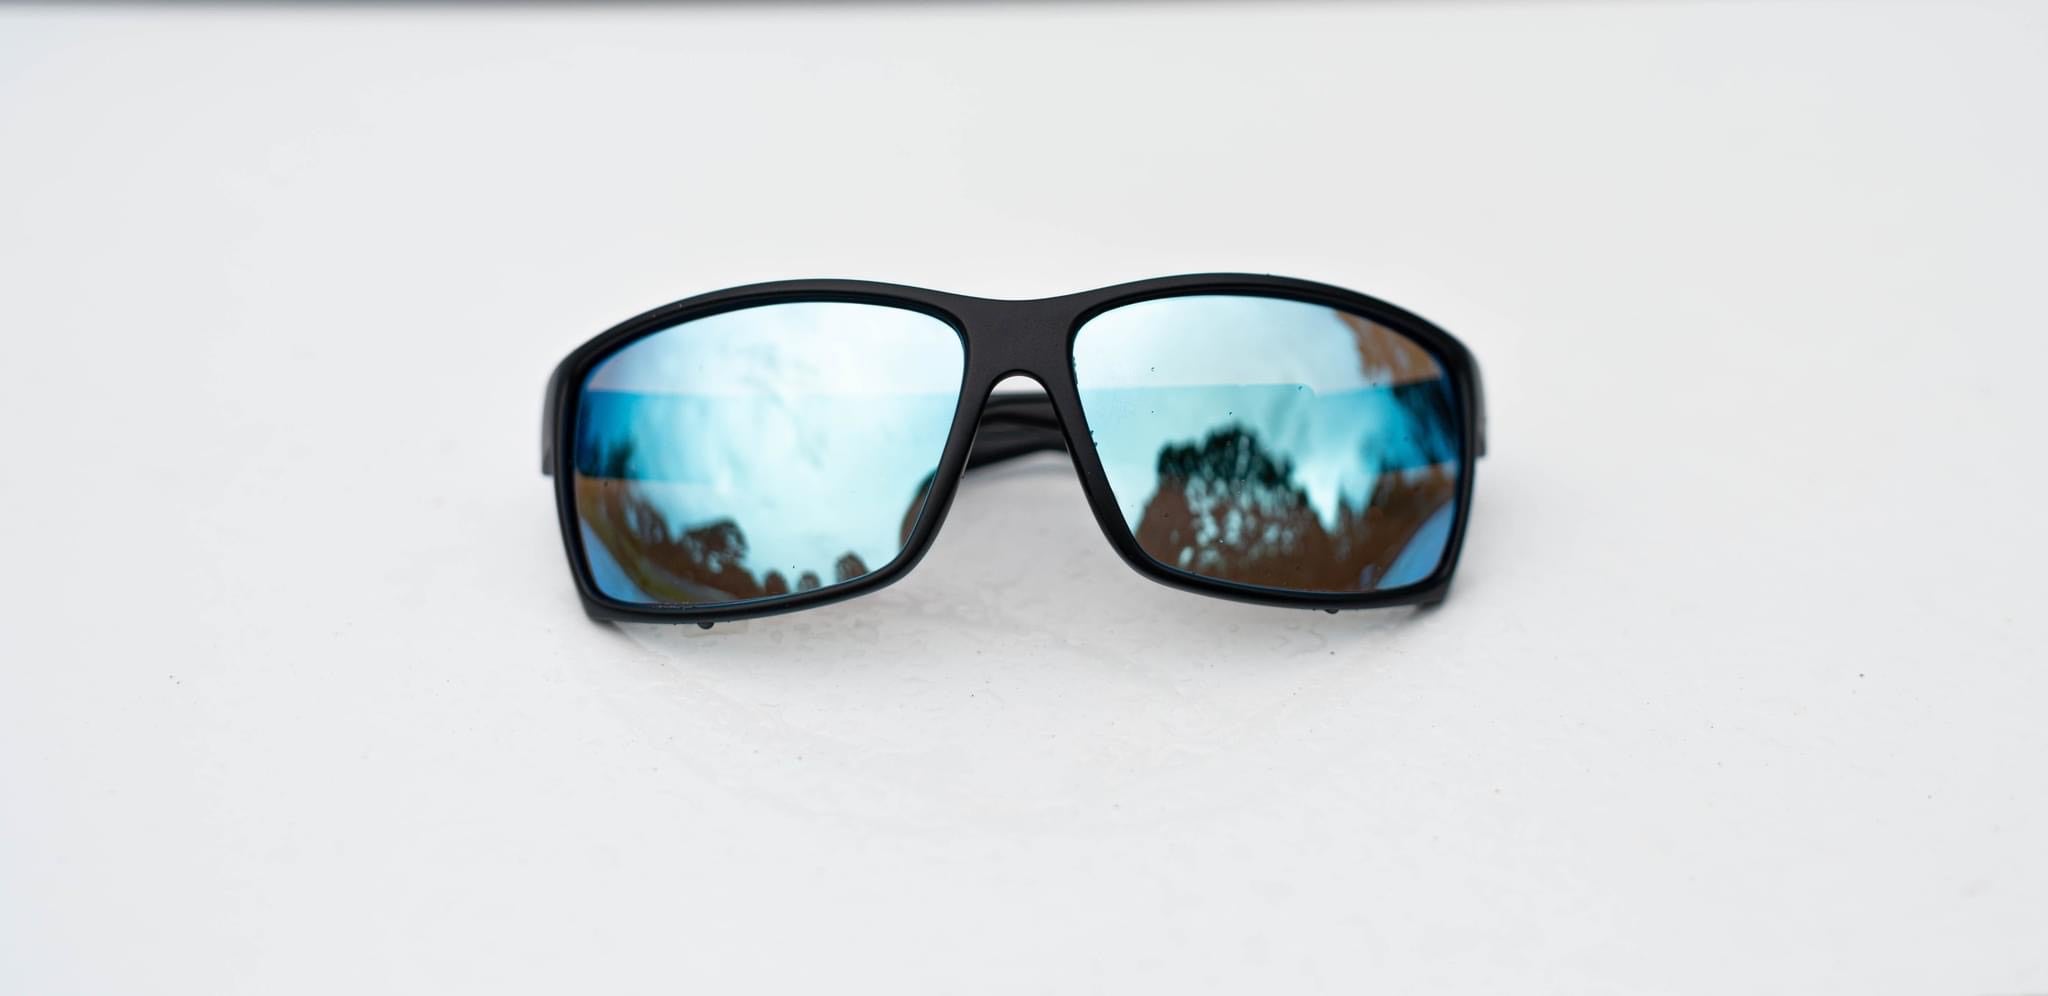 Polarized Fishing Sunglasses by Tibities - Limited Edition + Free